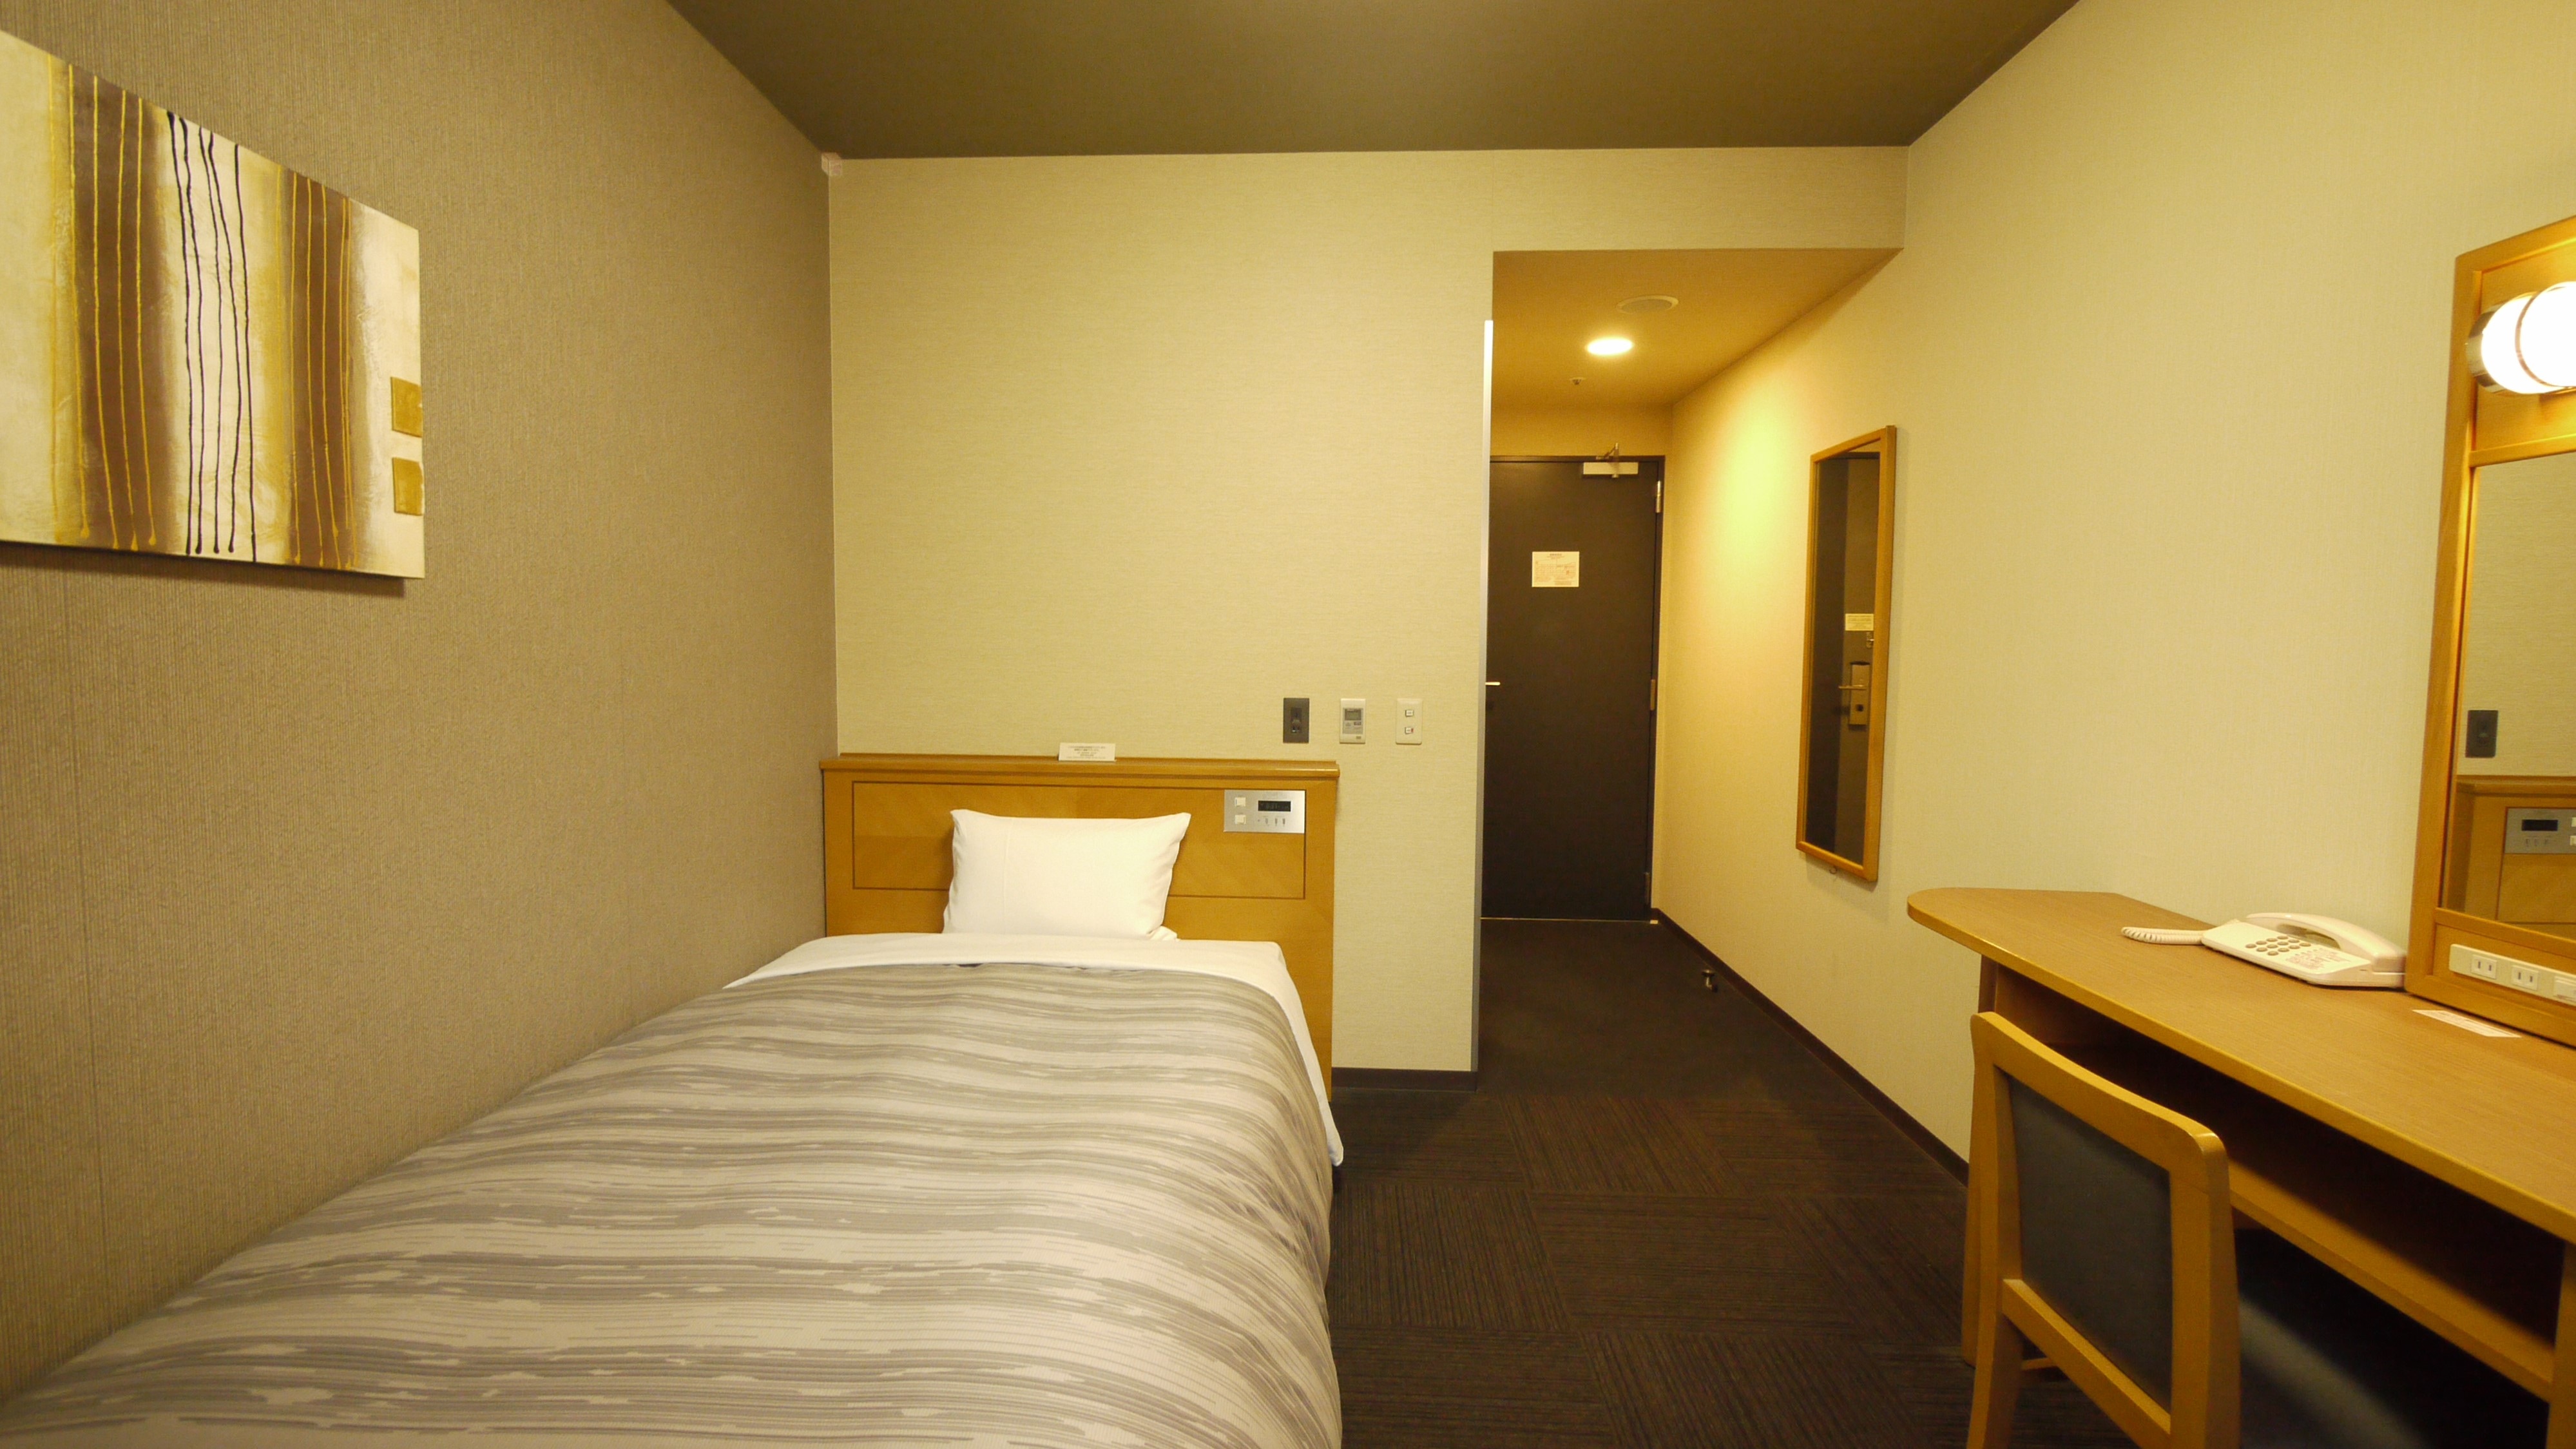 Standard single room for solo travelers (approx. 11㎡)